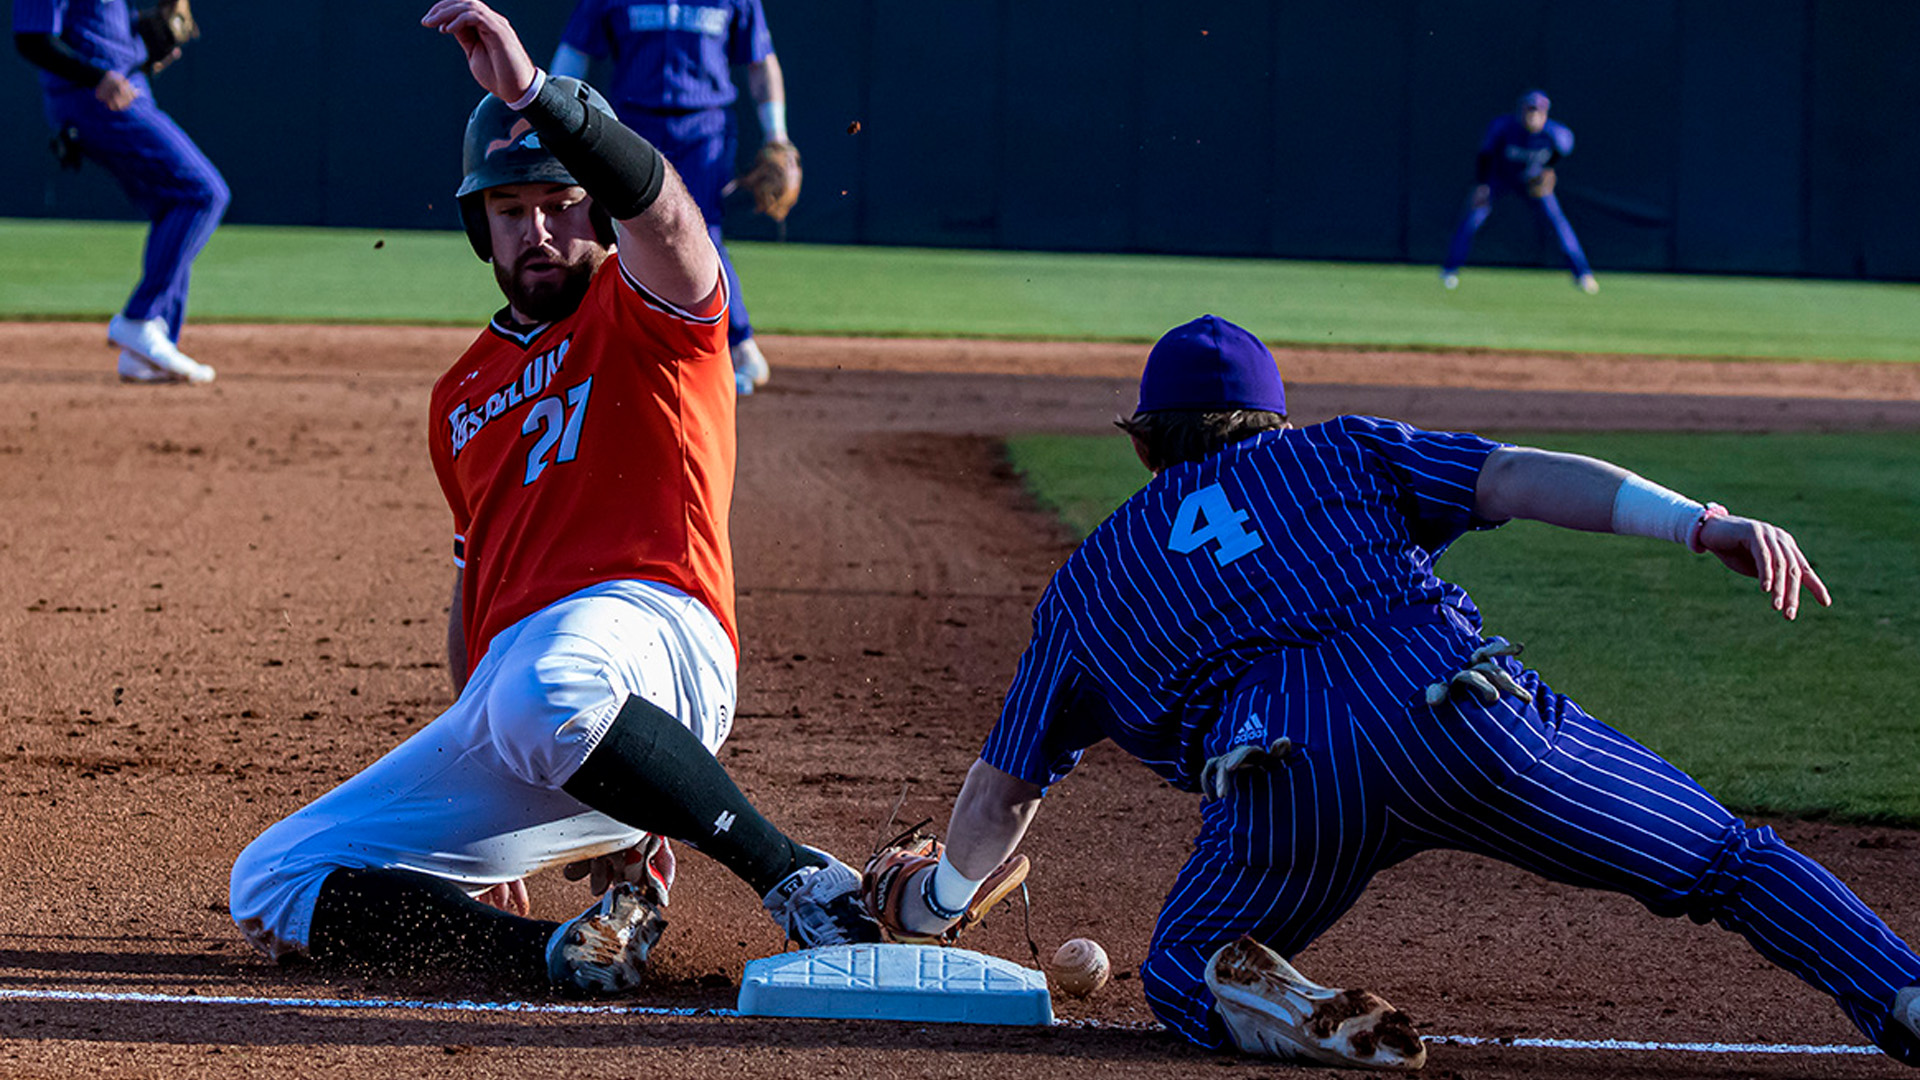 Fuzzy Furr went 4-for-4 with 5 RBI and slides in safely with this stolen base in TU's 16-6 win over #33 Young Harris (photo by Chuck Williams)